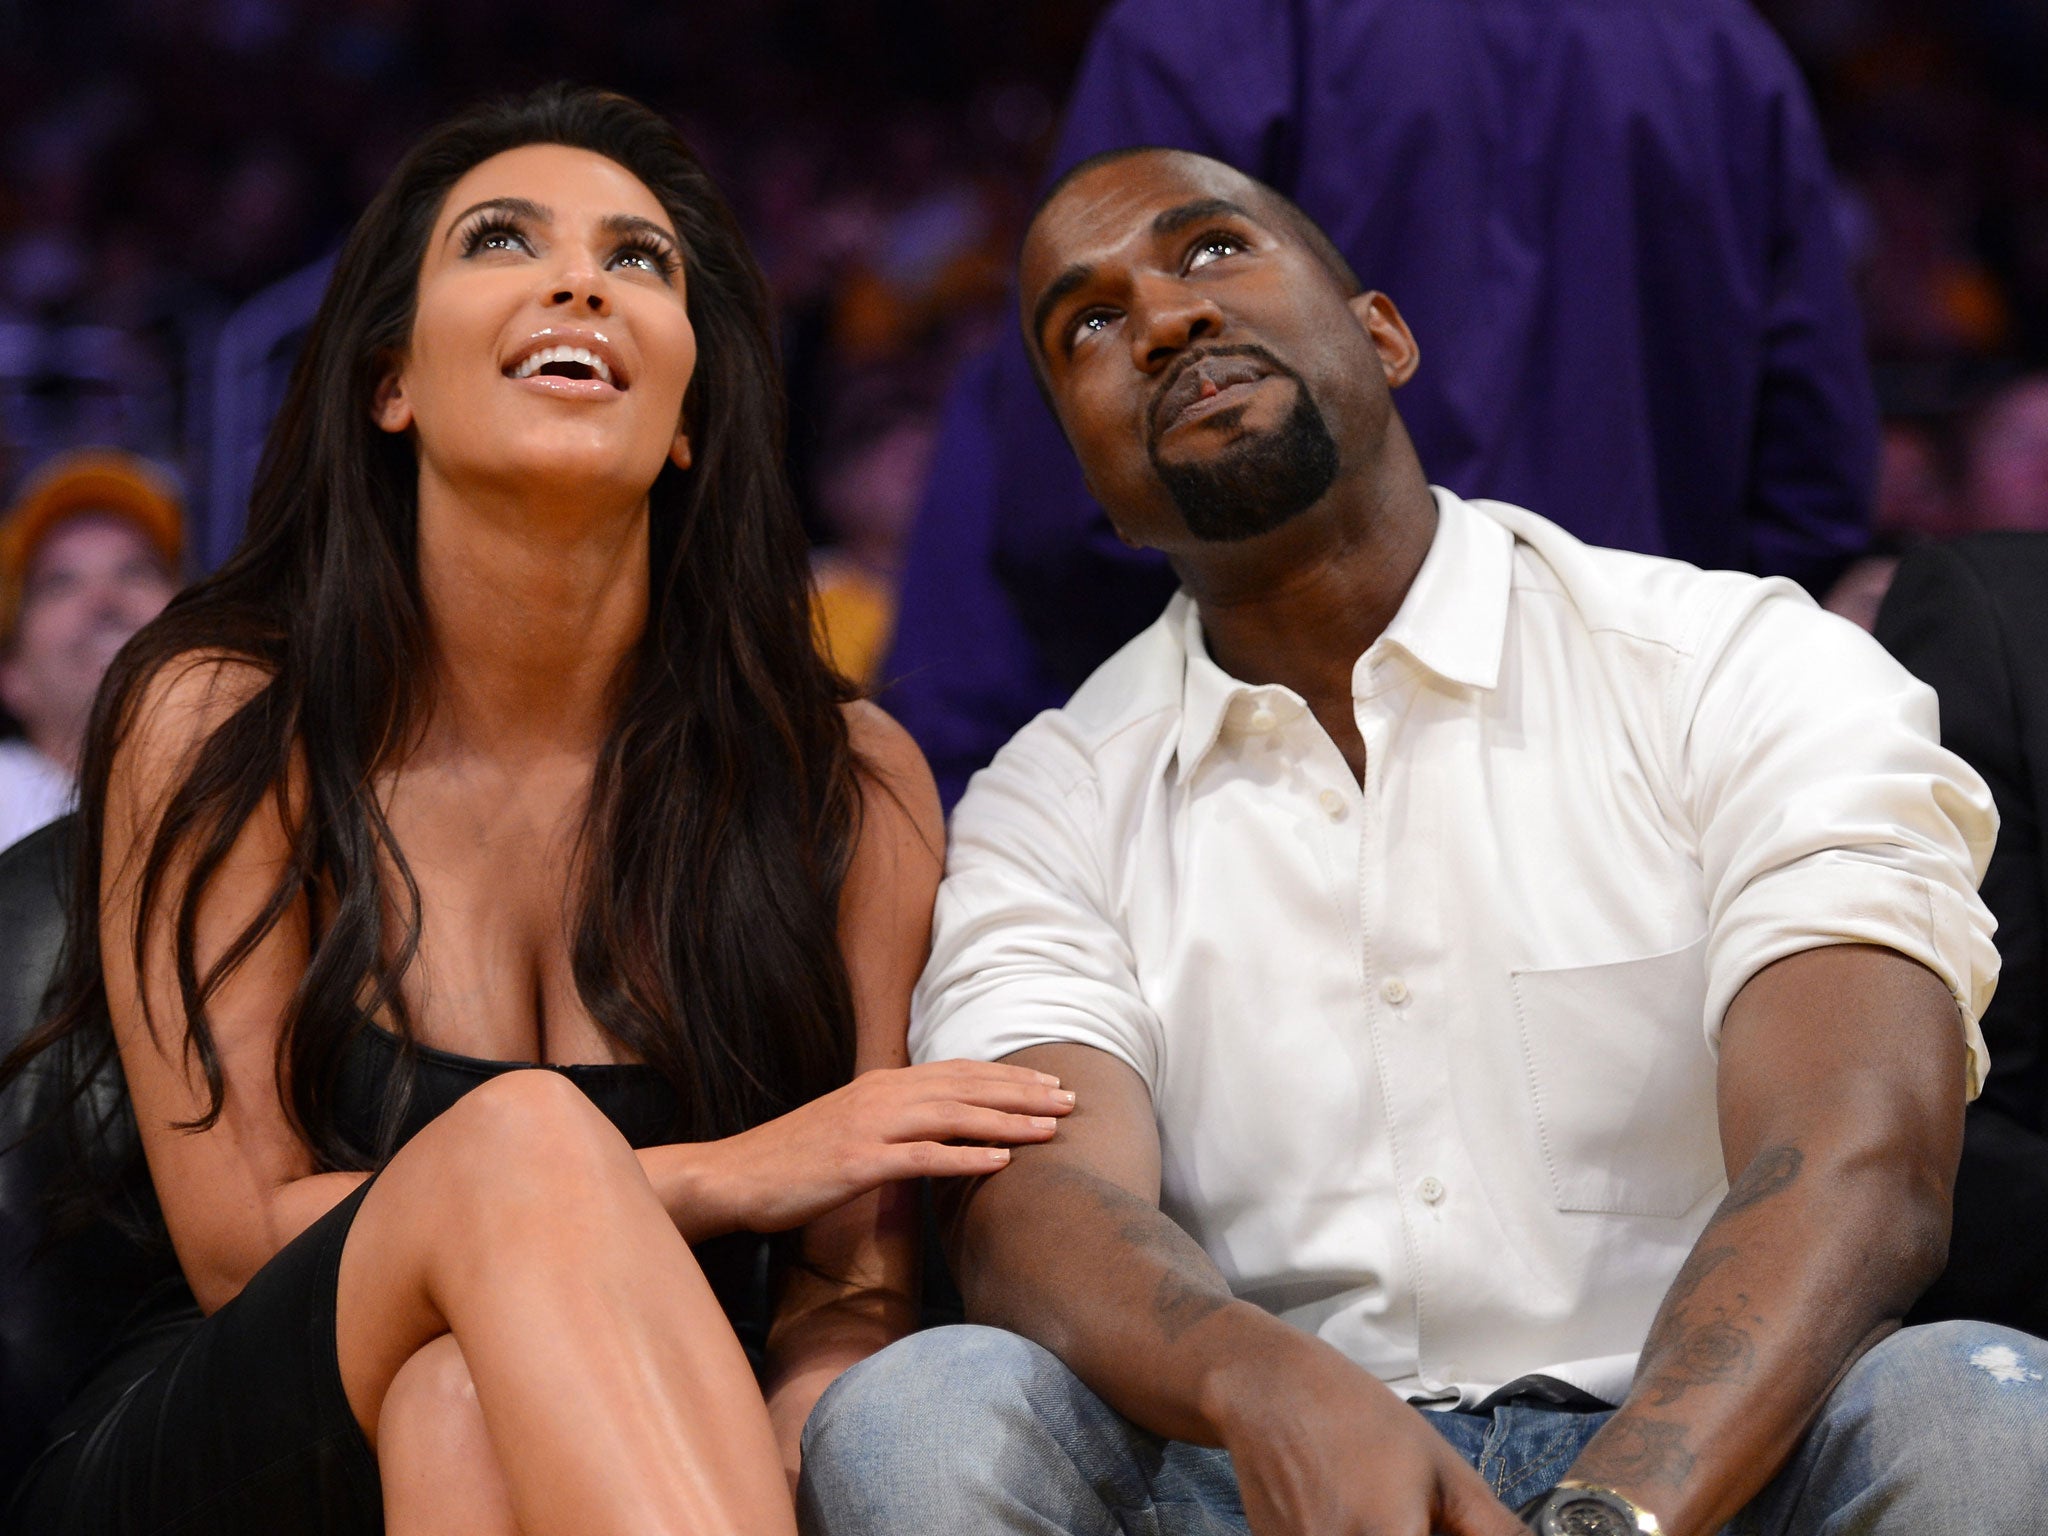 Kim Kardashian and Kanye West watch the video board from their courtside seats as the Los Angeles Lakers take on the Denver Nuggets in Game Seven of the Western Conference Quarterfinals in the 2012 NBA Playoffs on May 12, 2012 at Staples Center in Los Angeles, California.